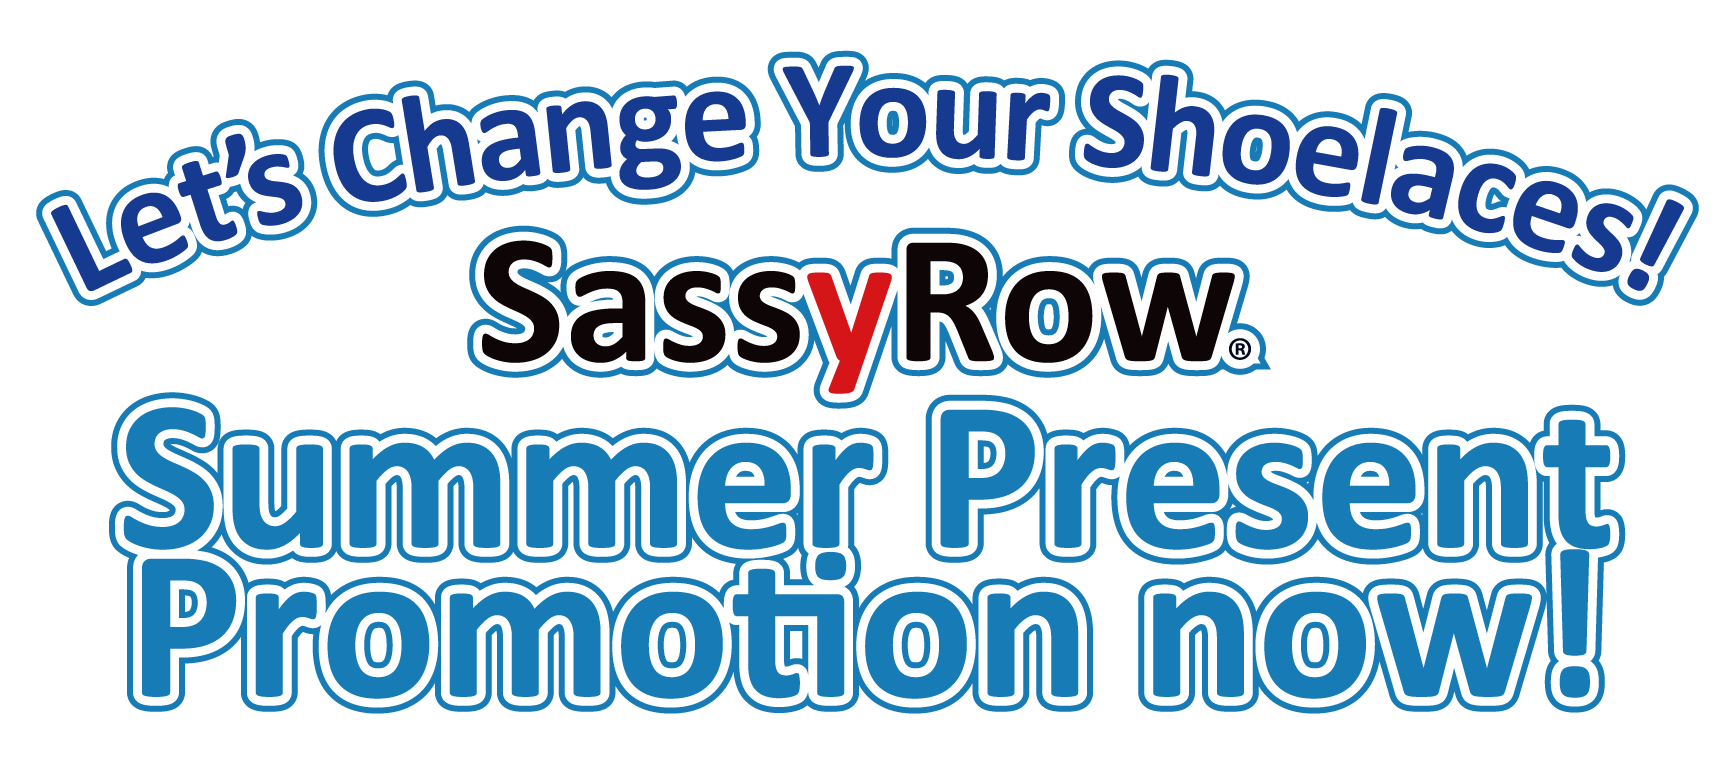 Let's change your shoelaces to sassyrow